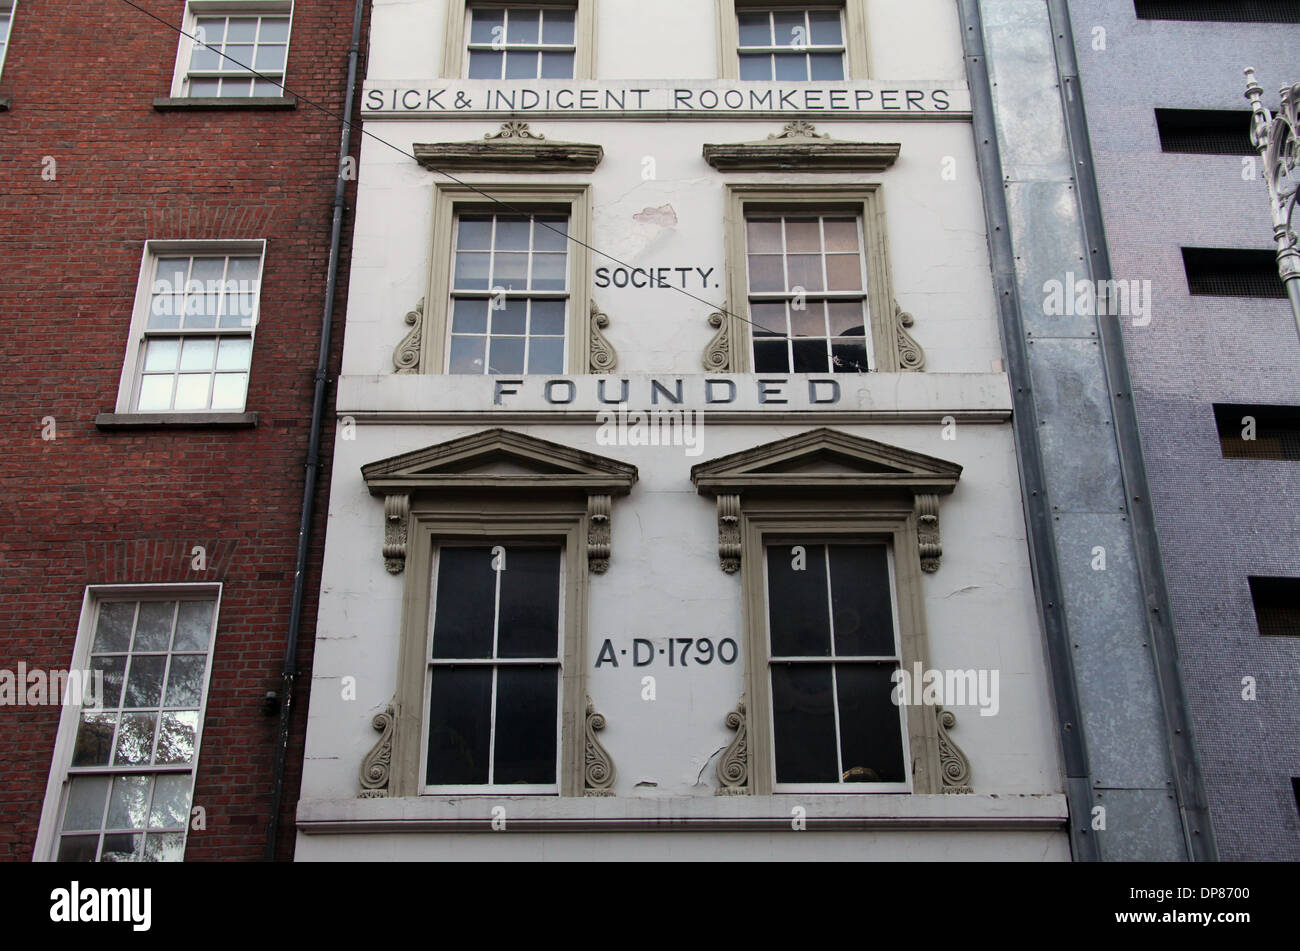 The Sick & Indigent Roomkeepers Society Building in Dublin which is its oldest charity and was founded in 1790 Stock Photo